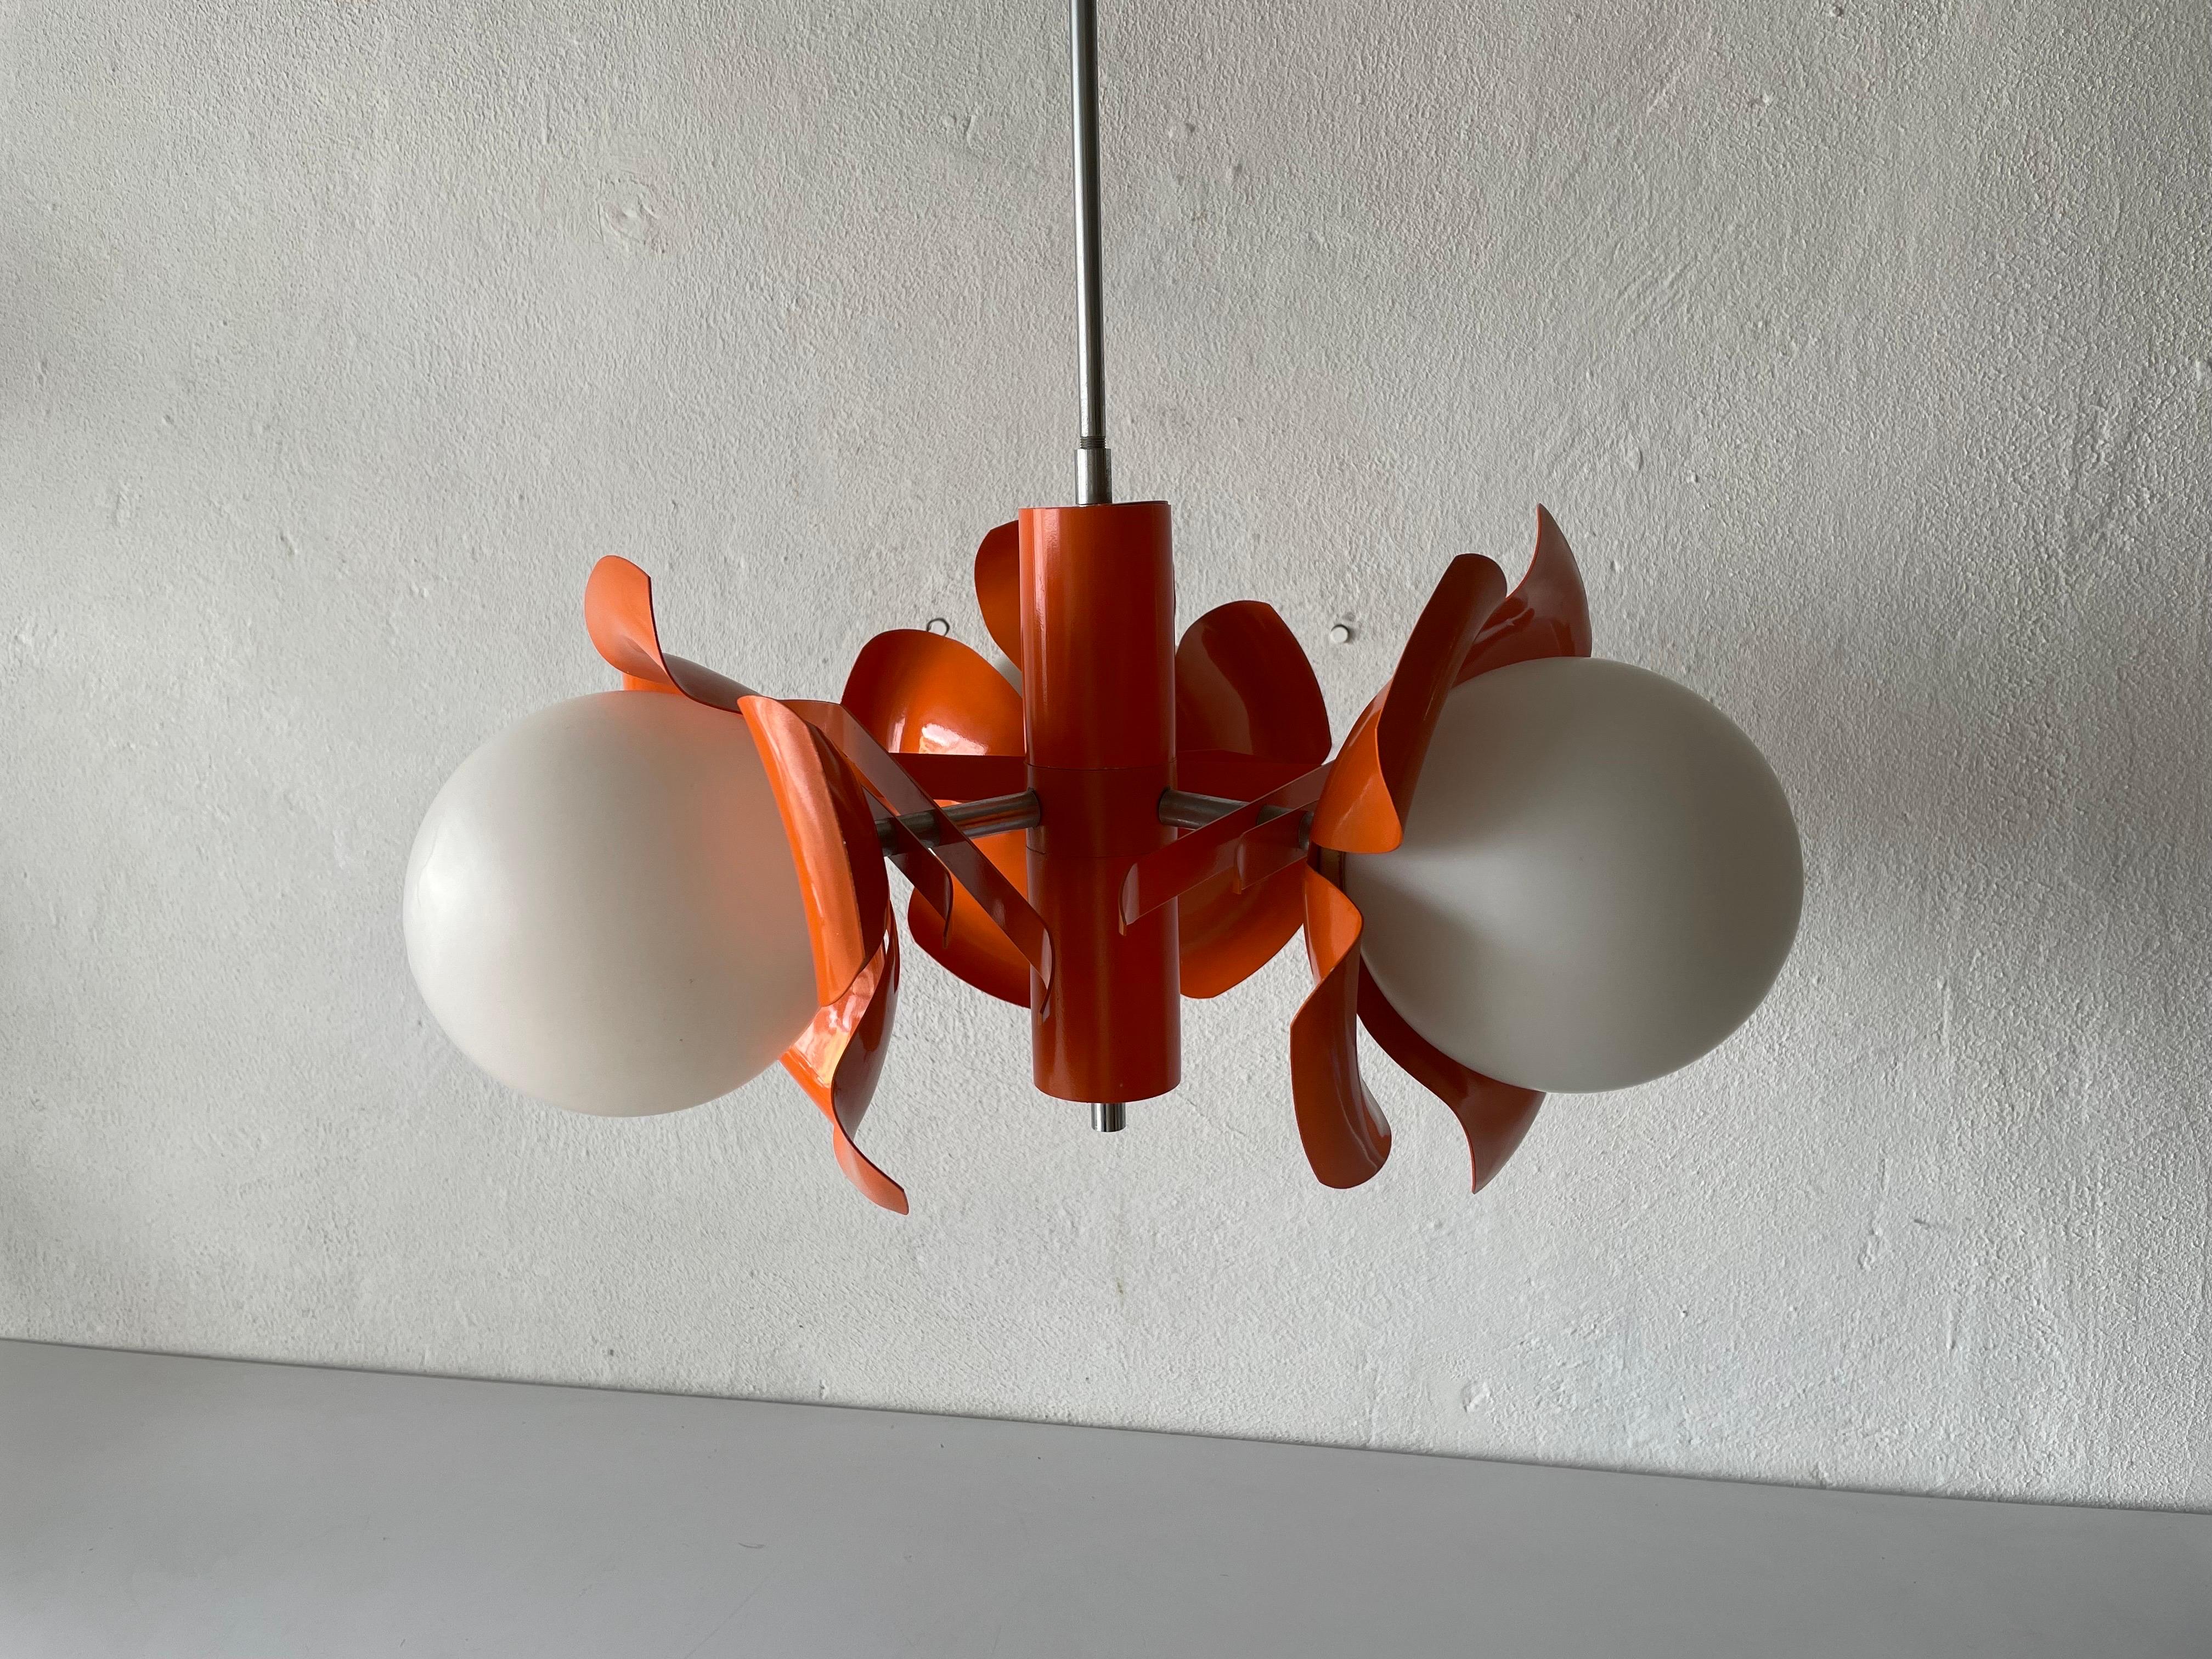 Wonderful Orange Flower Design Metal Body & 3 Ball Glasses Space Age Ceiling Lamp, 1970s, Italy

Minimalist and rare design. 

Lampshade is in good condition and clean. 
This lamp works with 3xE14 light bulbs. 
Max 100W Wired and suitable to